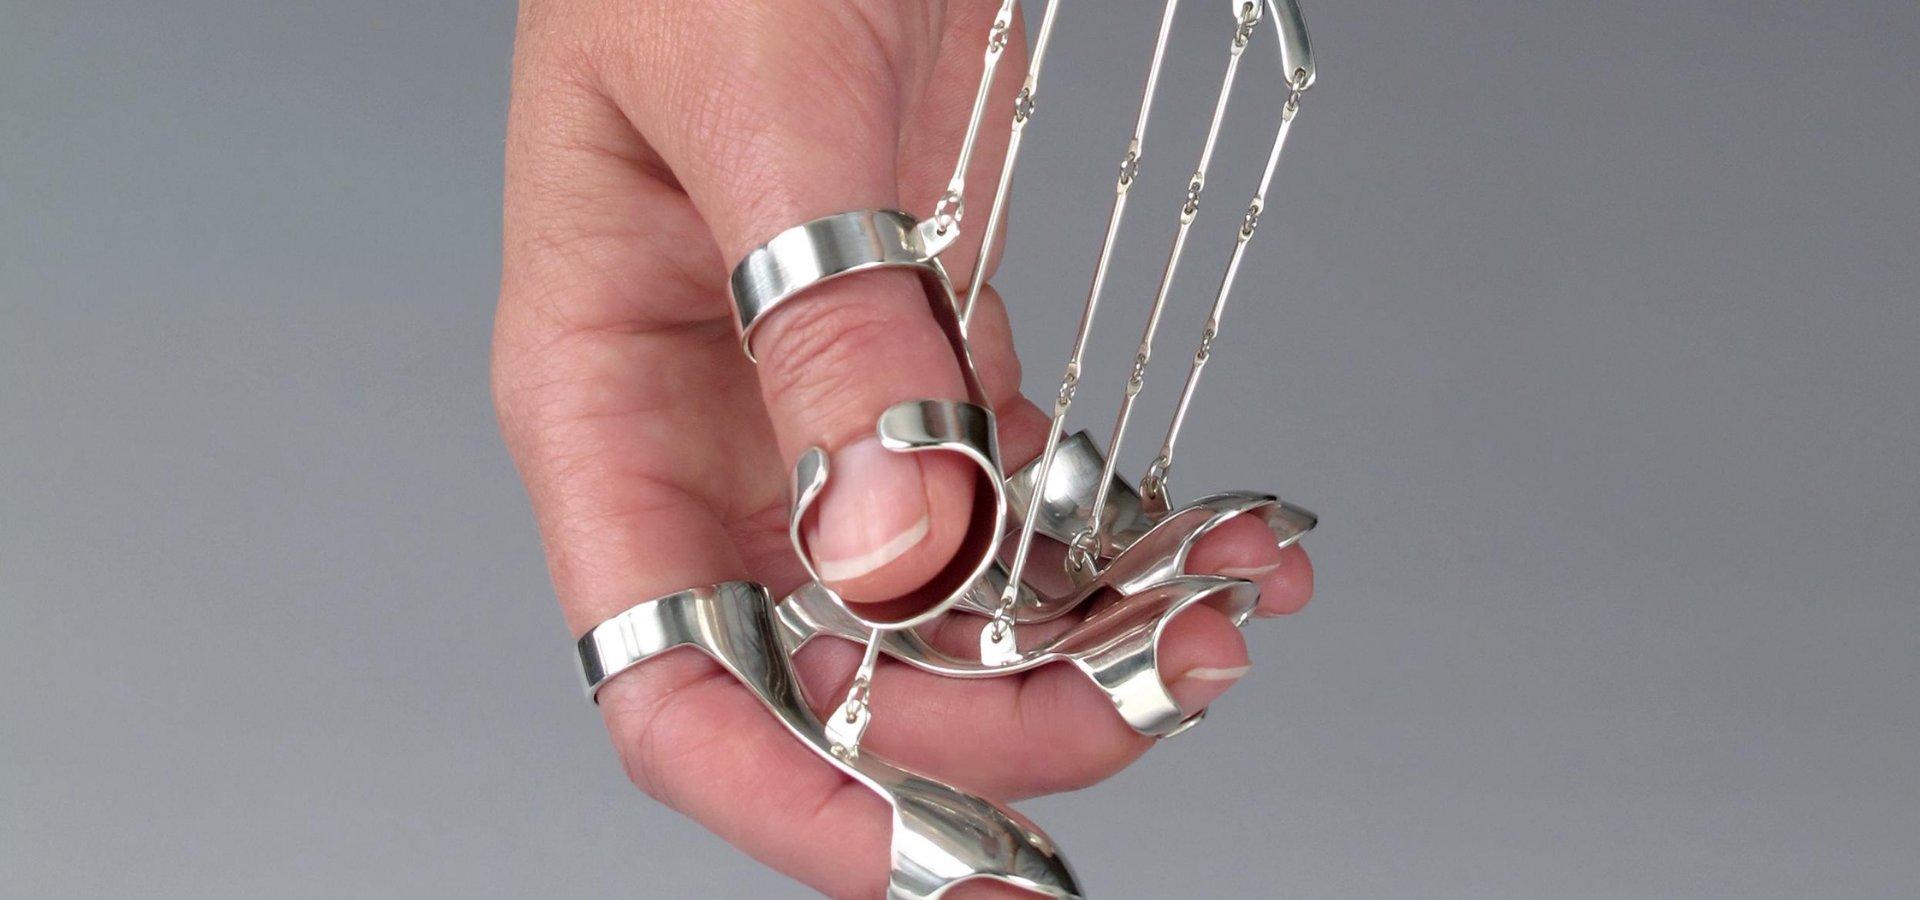 Silver jewelry art wrapped on finger and connected to wrist